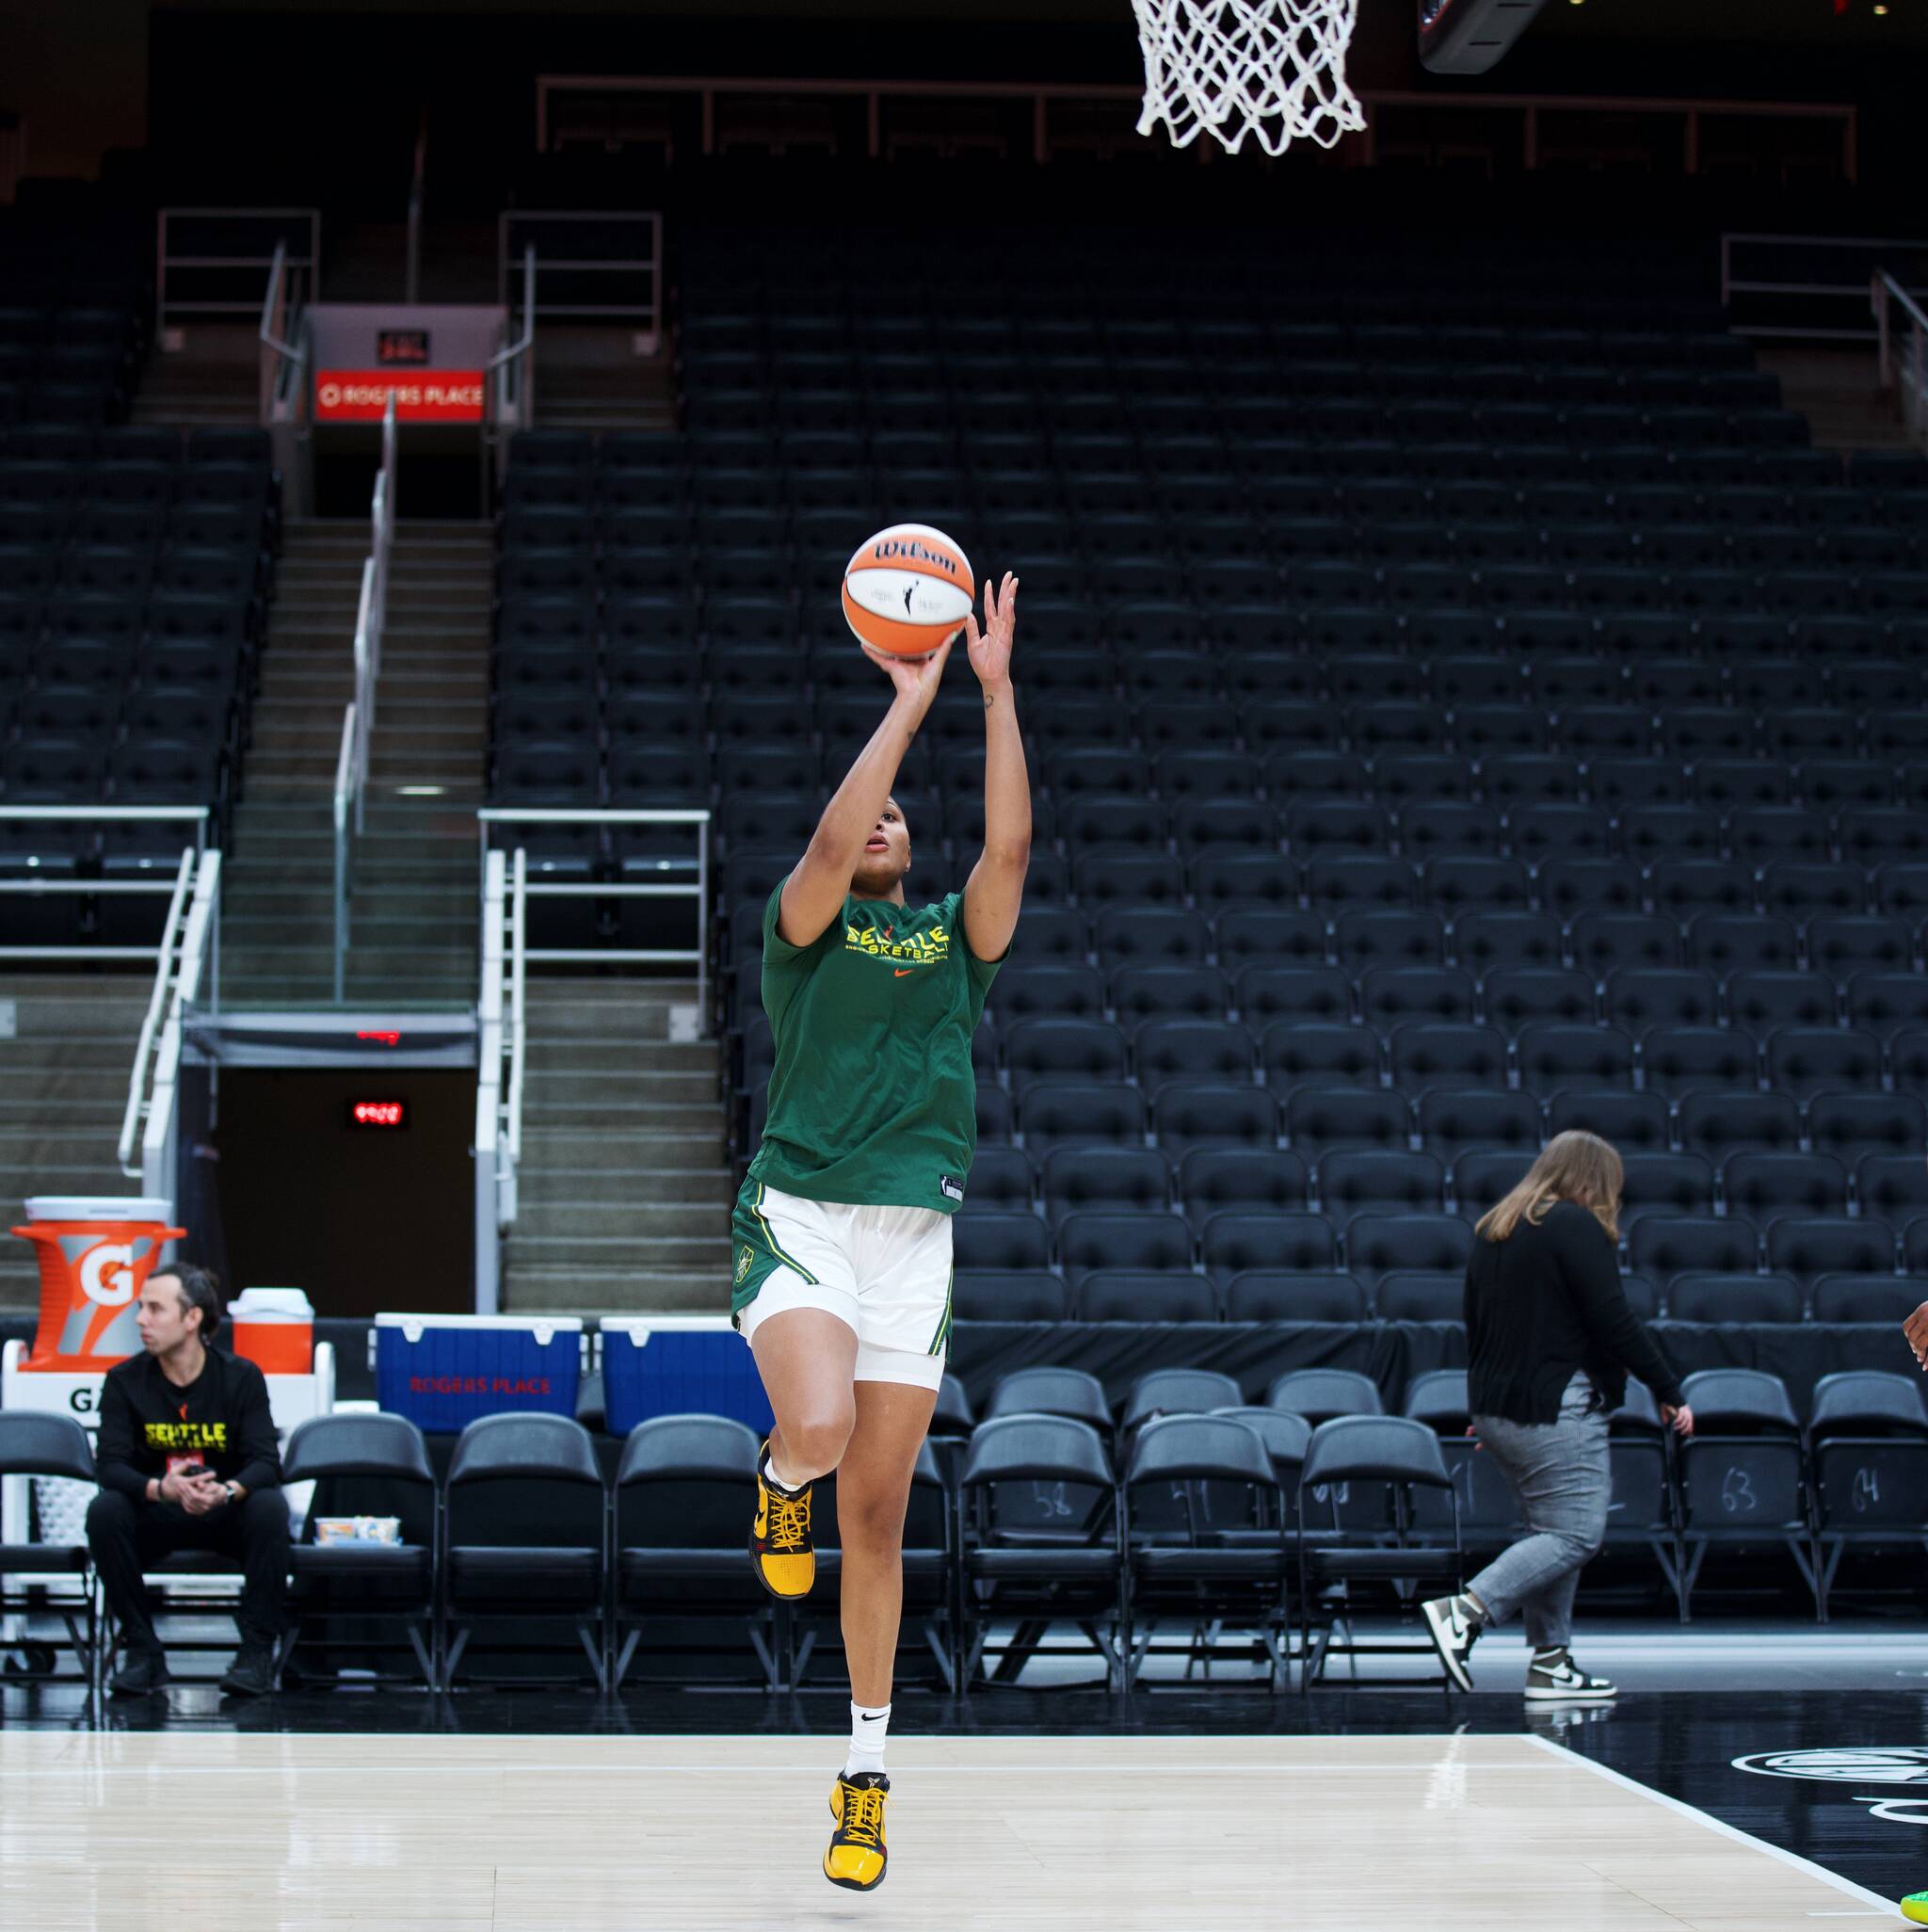 Quay Miller taking a shot during warmups in Canada. Photo provided by Seattle Storm